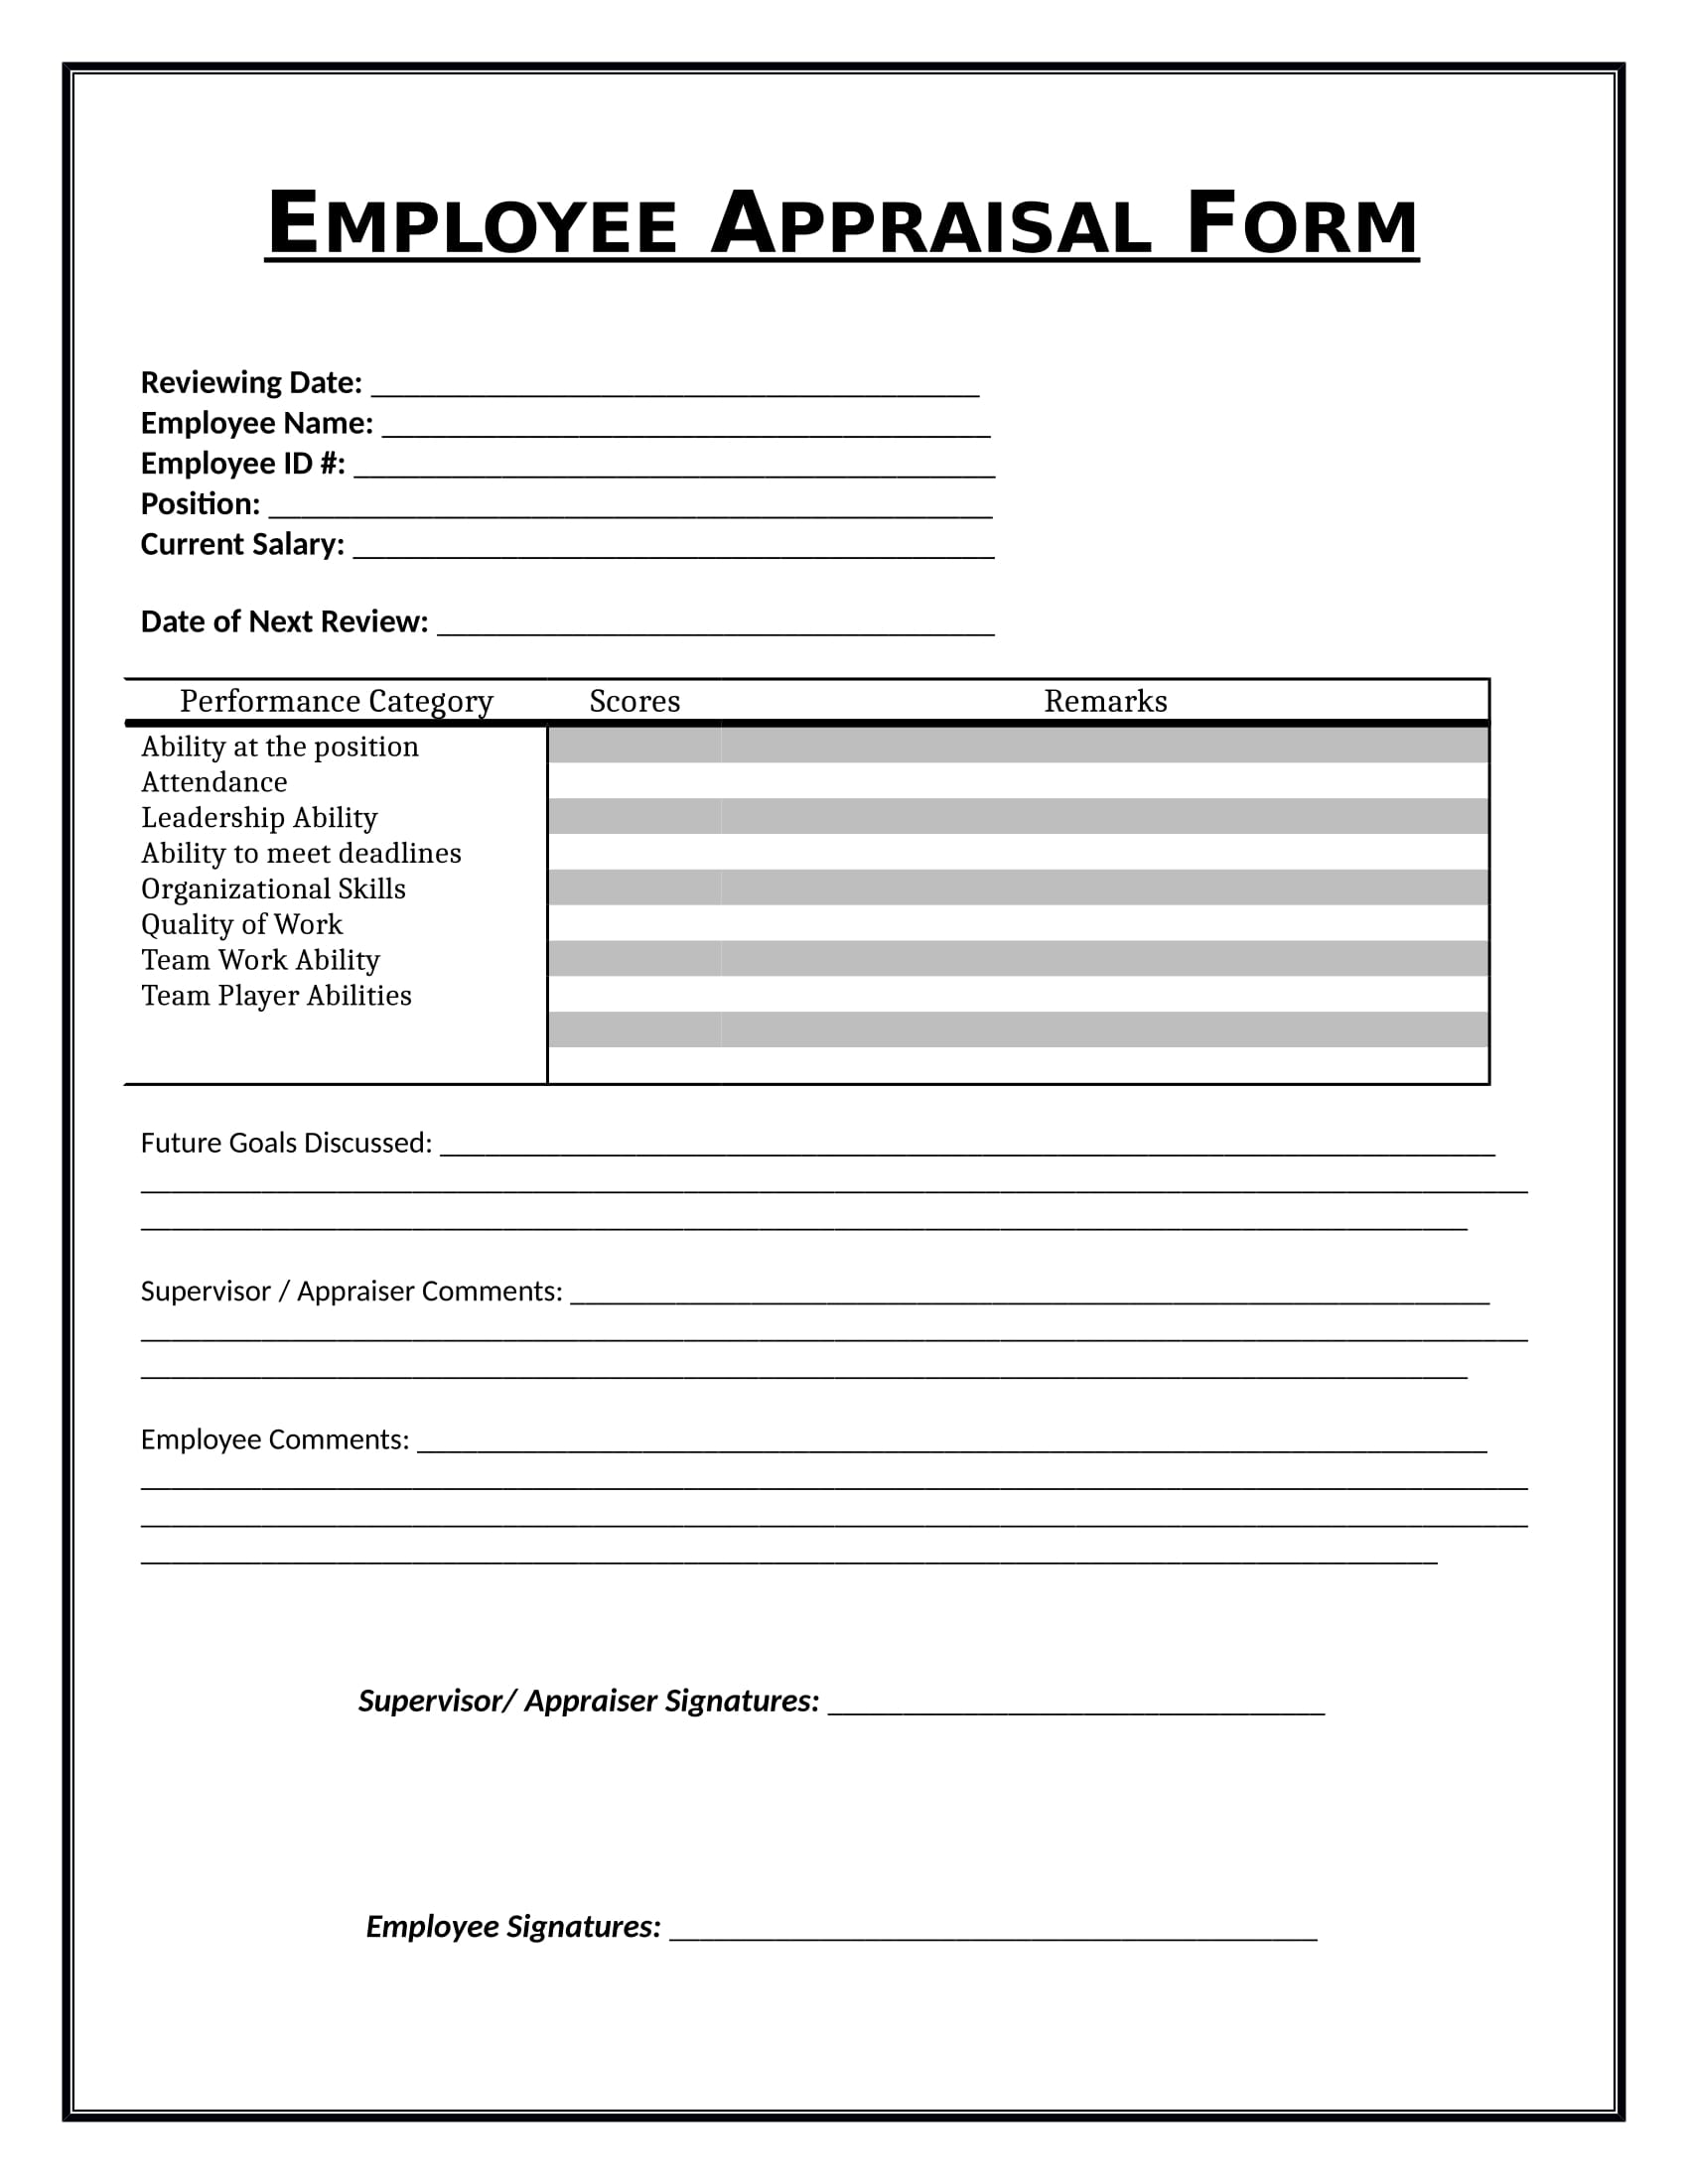 employee appraisal review form 11